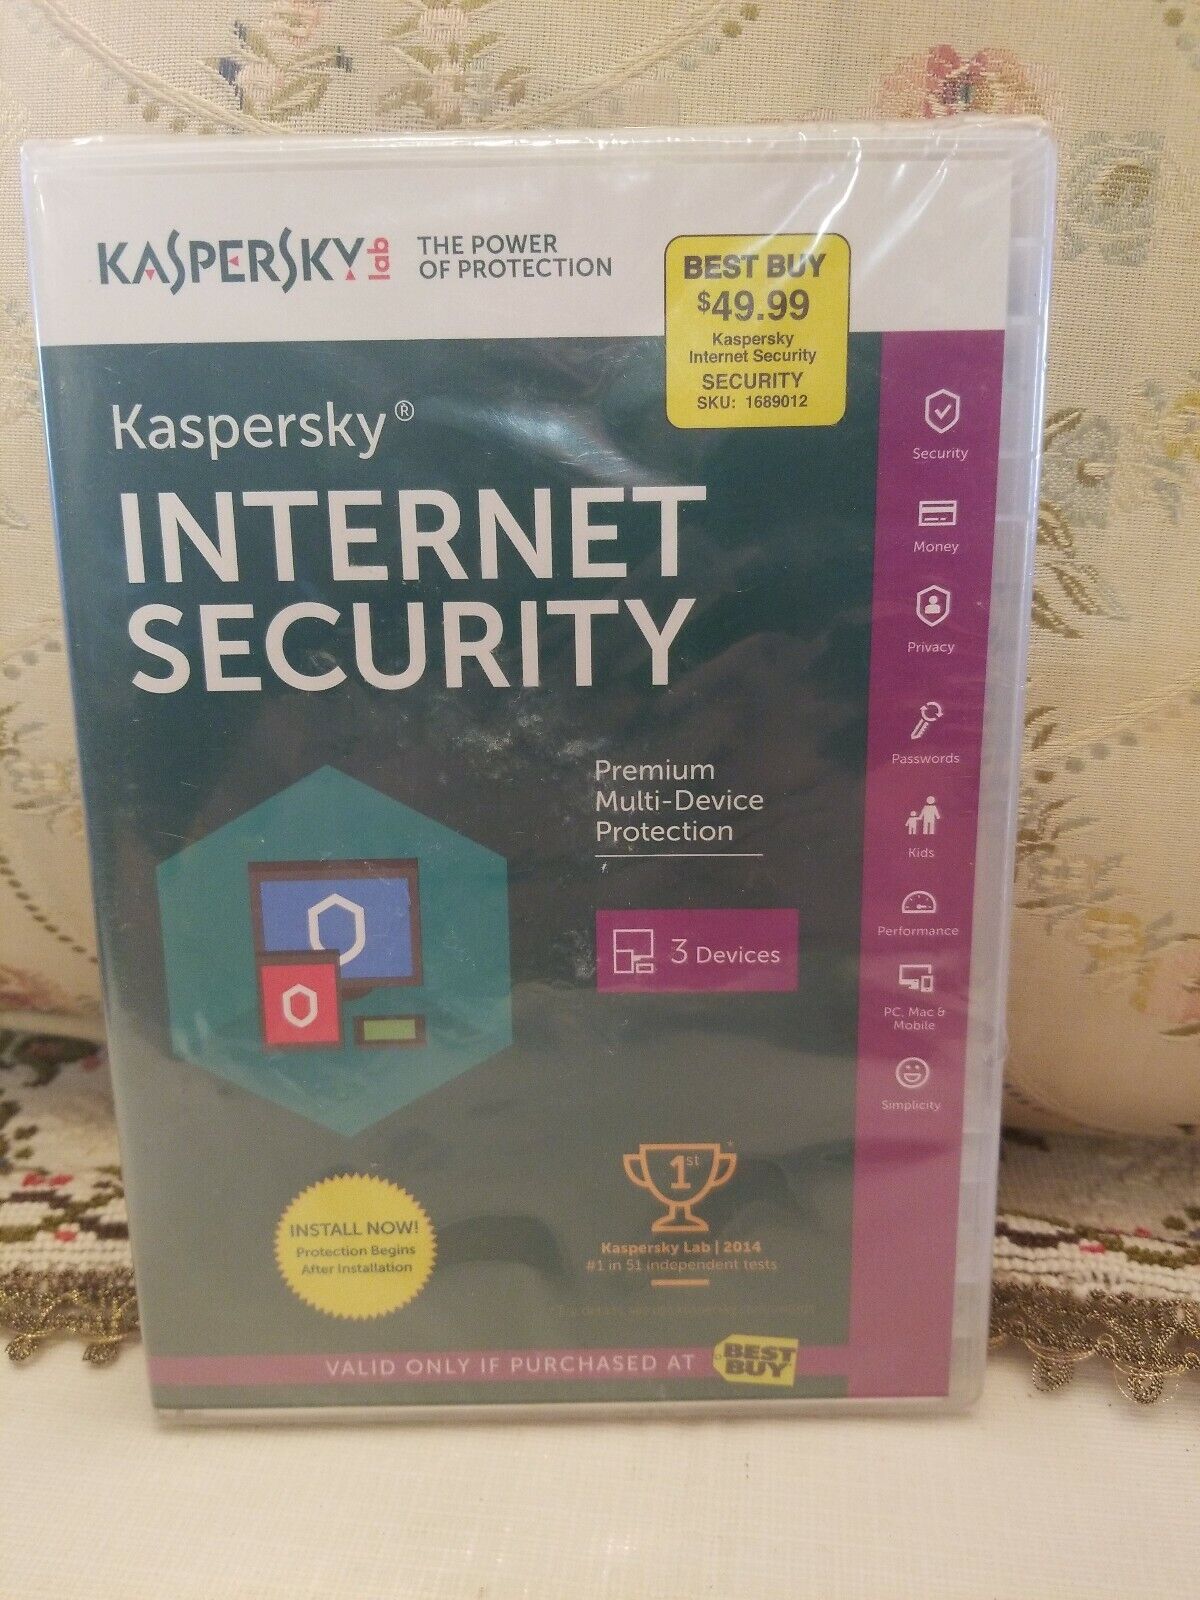 KASPERSKY INTERNET SECURITY PROTECTION 2015 FOR 3 DEVICES New Sealed